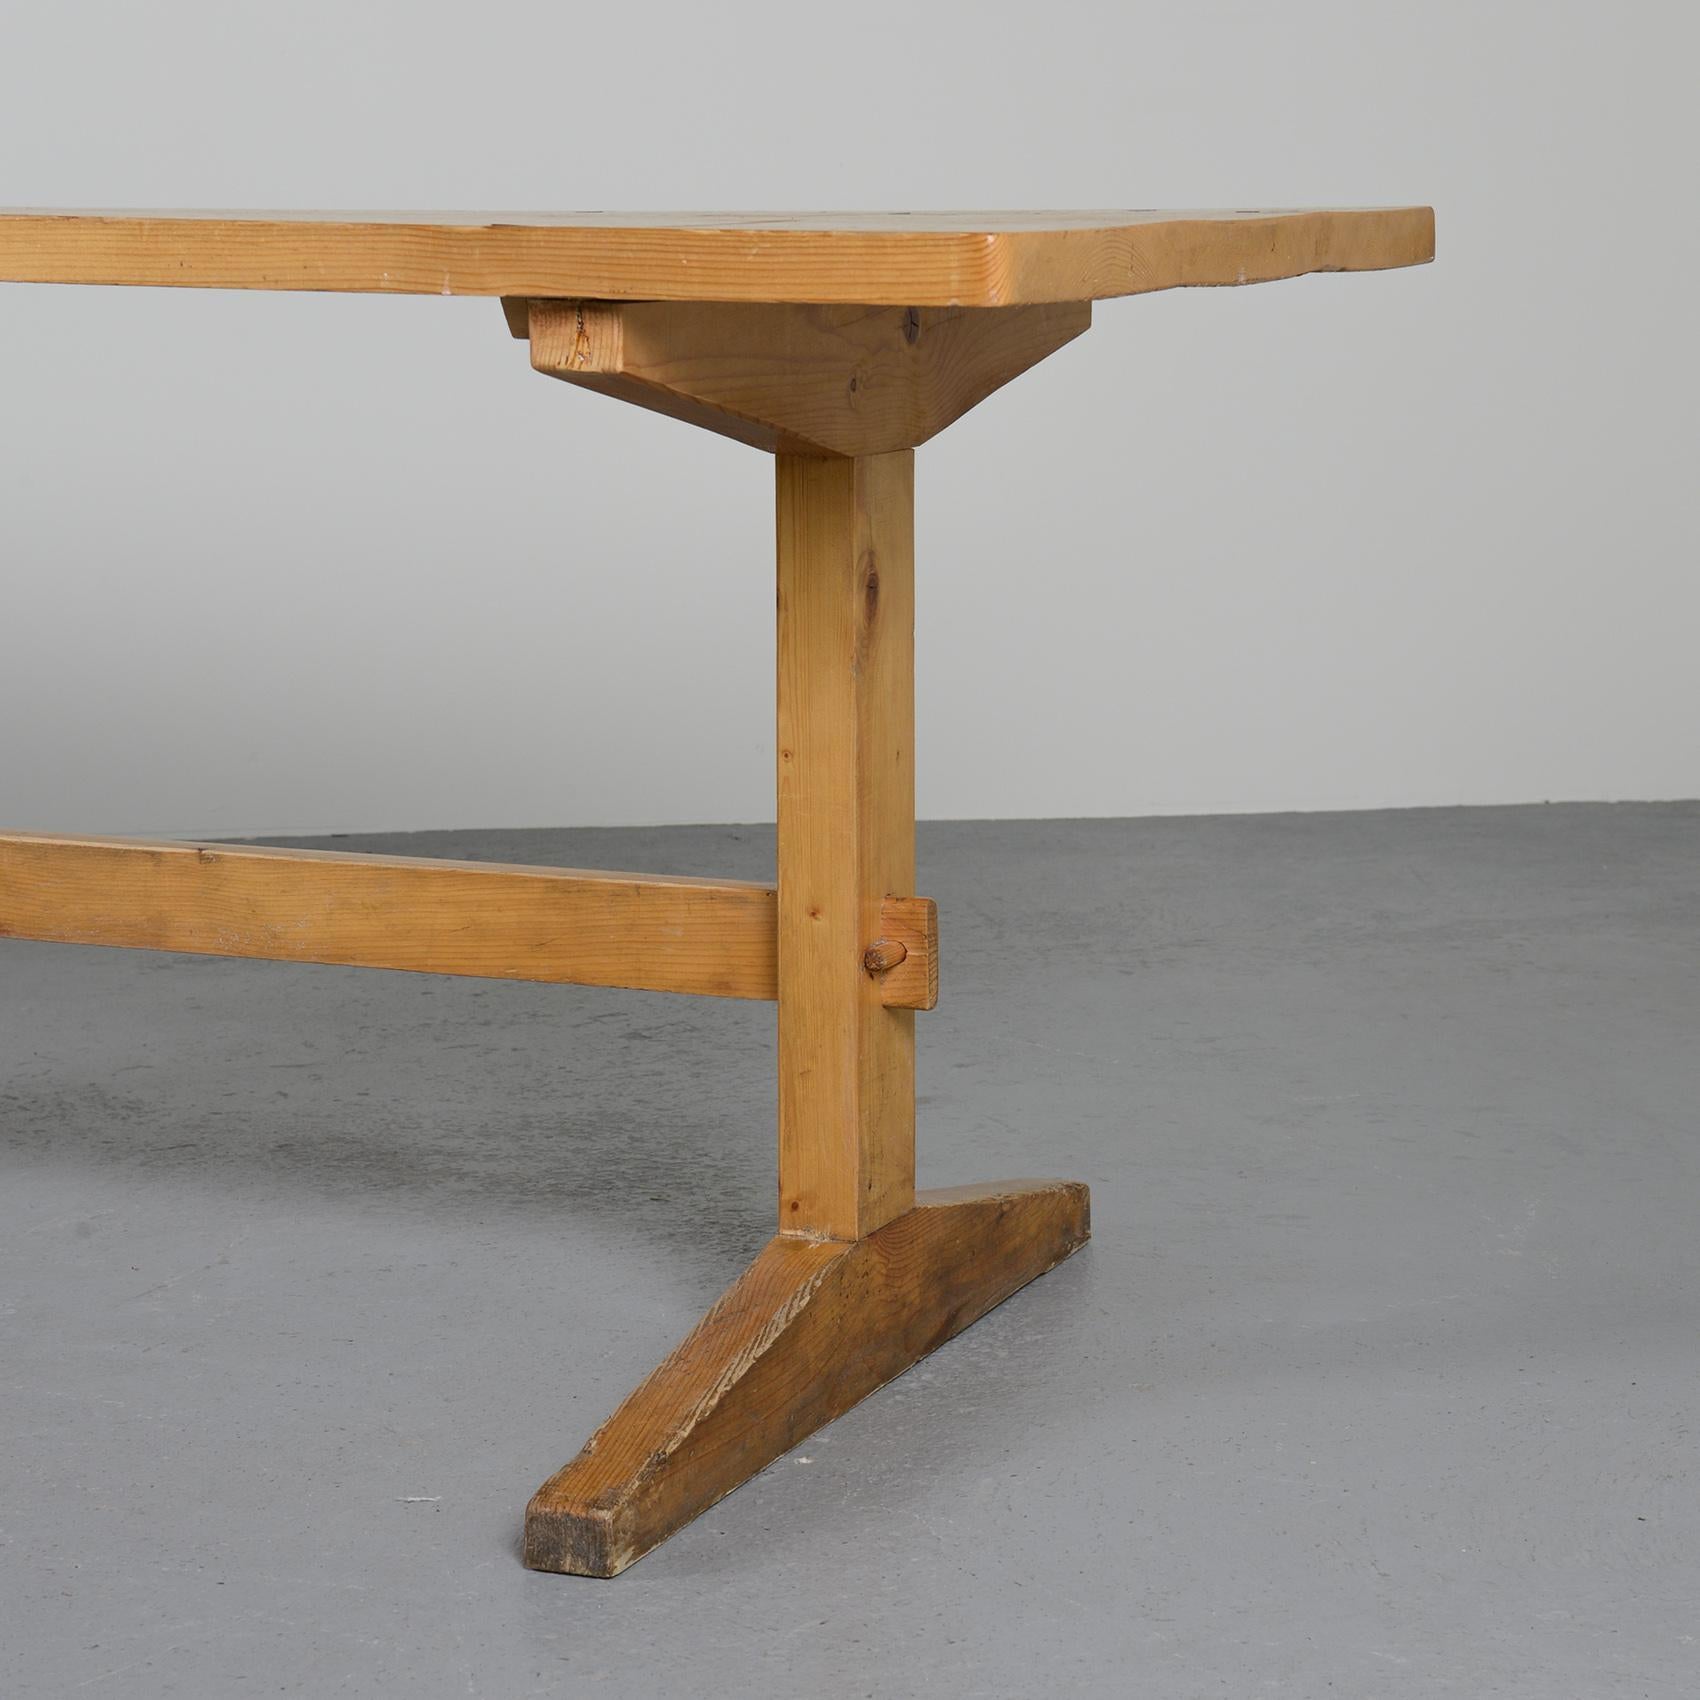 Mid-Century Modern Dining Table from Meribel, French Alps, circa 1970